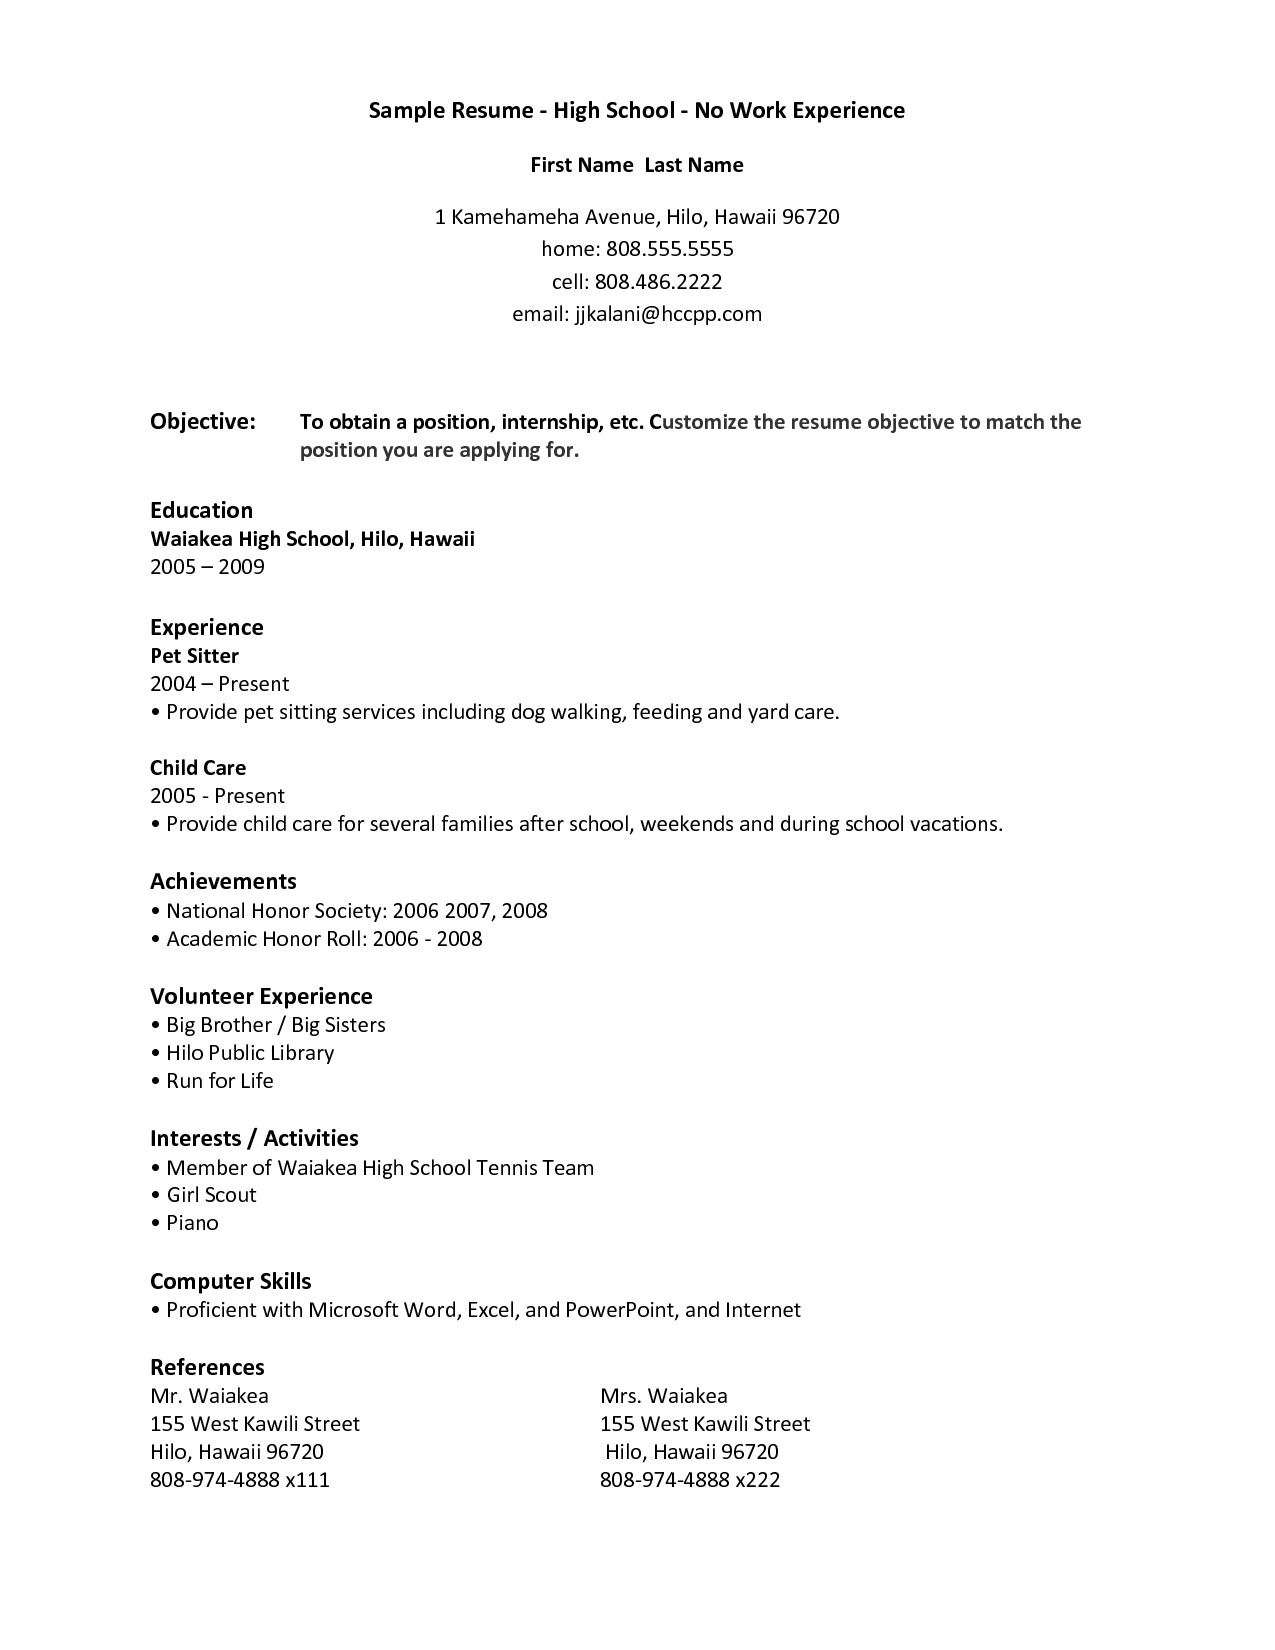 Sample Of Resume for High School Graduate with No Experience Resume for Students with No Experience – Task List Templates